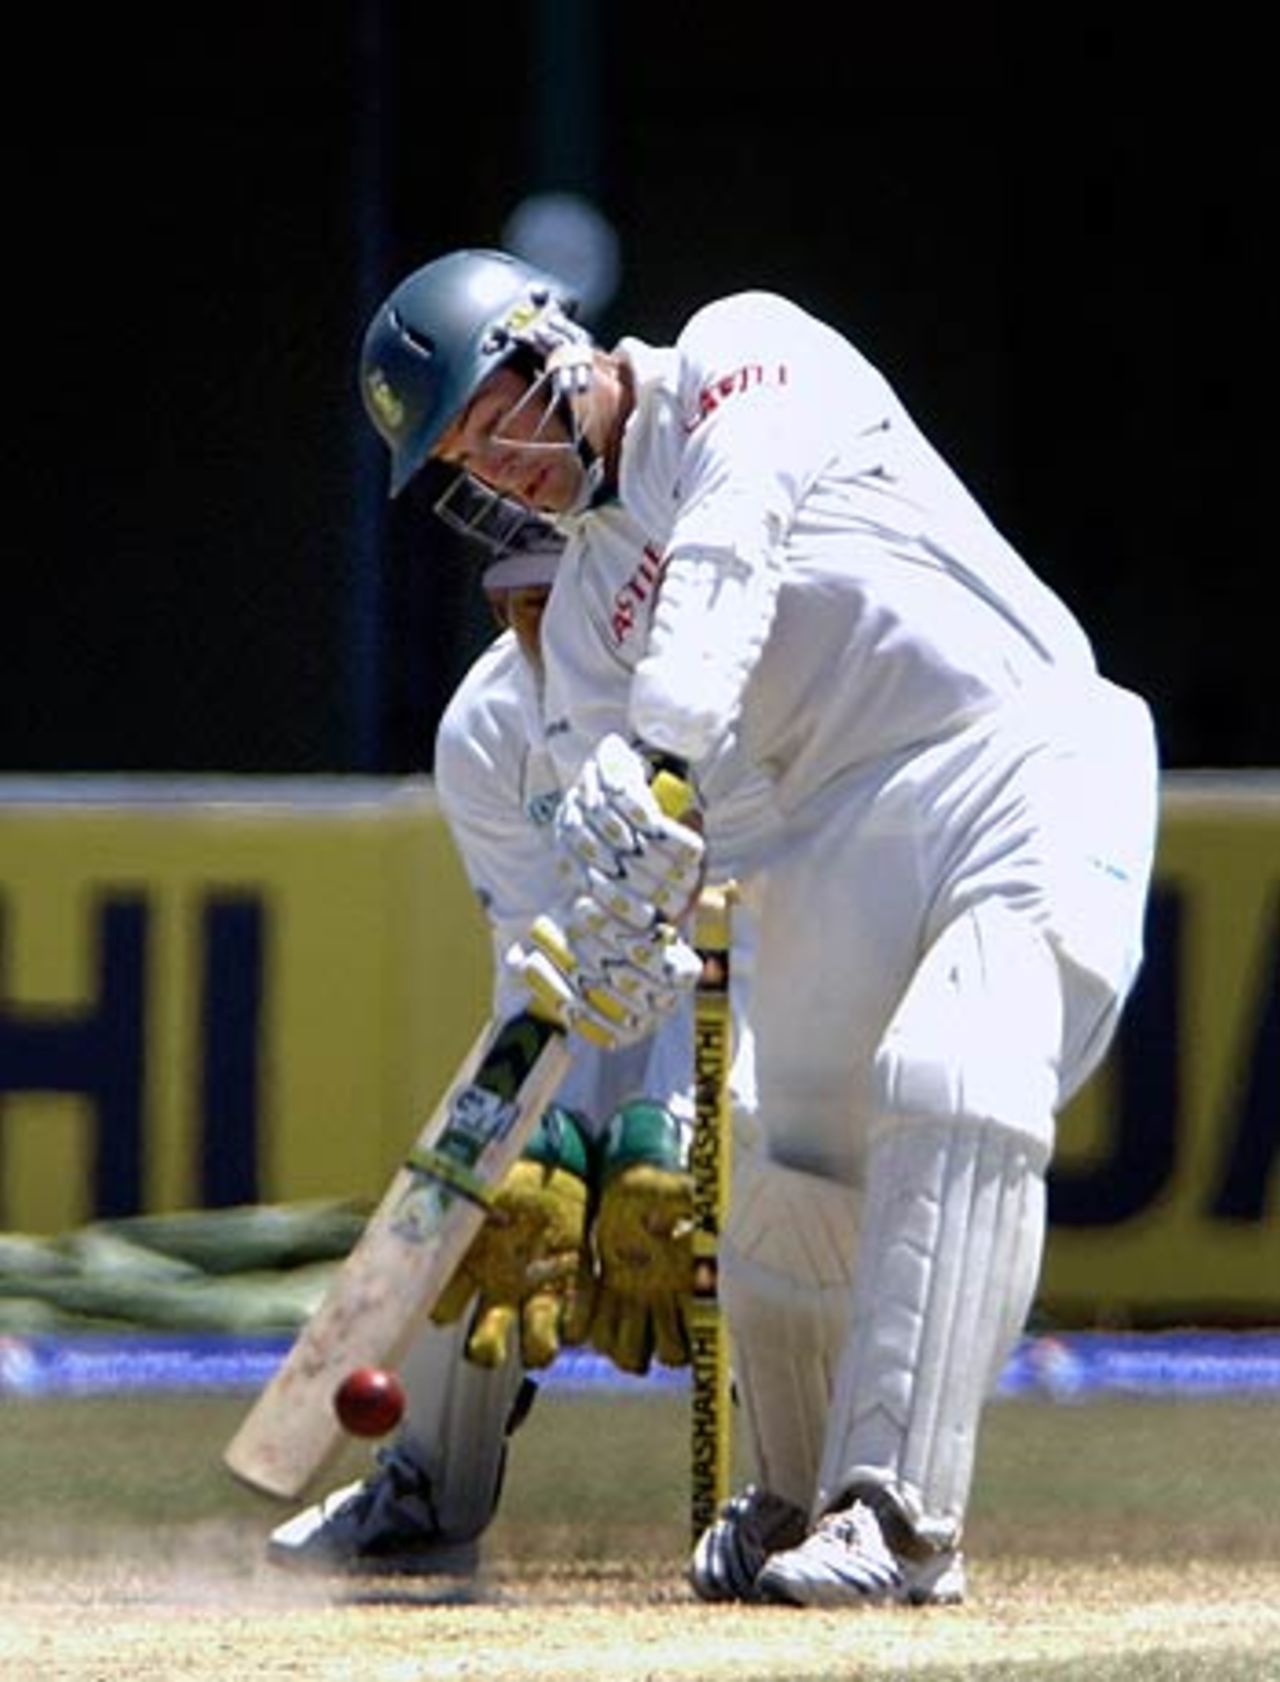 Mark Boucher added quick runs on the fourth day, Sri Lanka v South Africa, 2nd Test, Colombo, 4th day, August 7, 2006